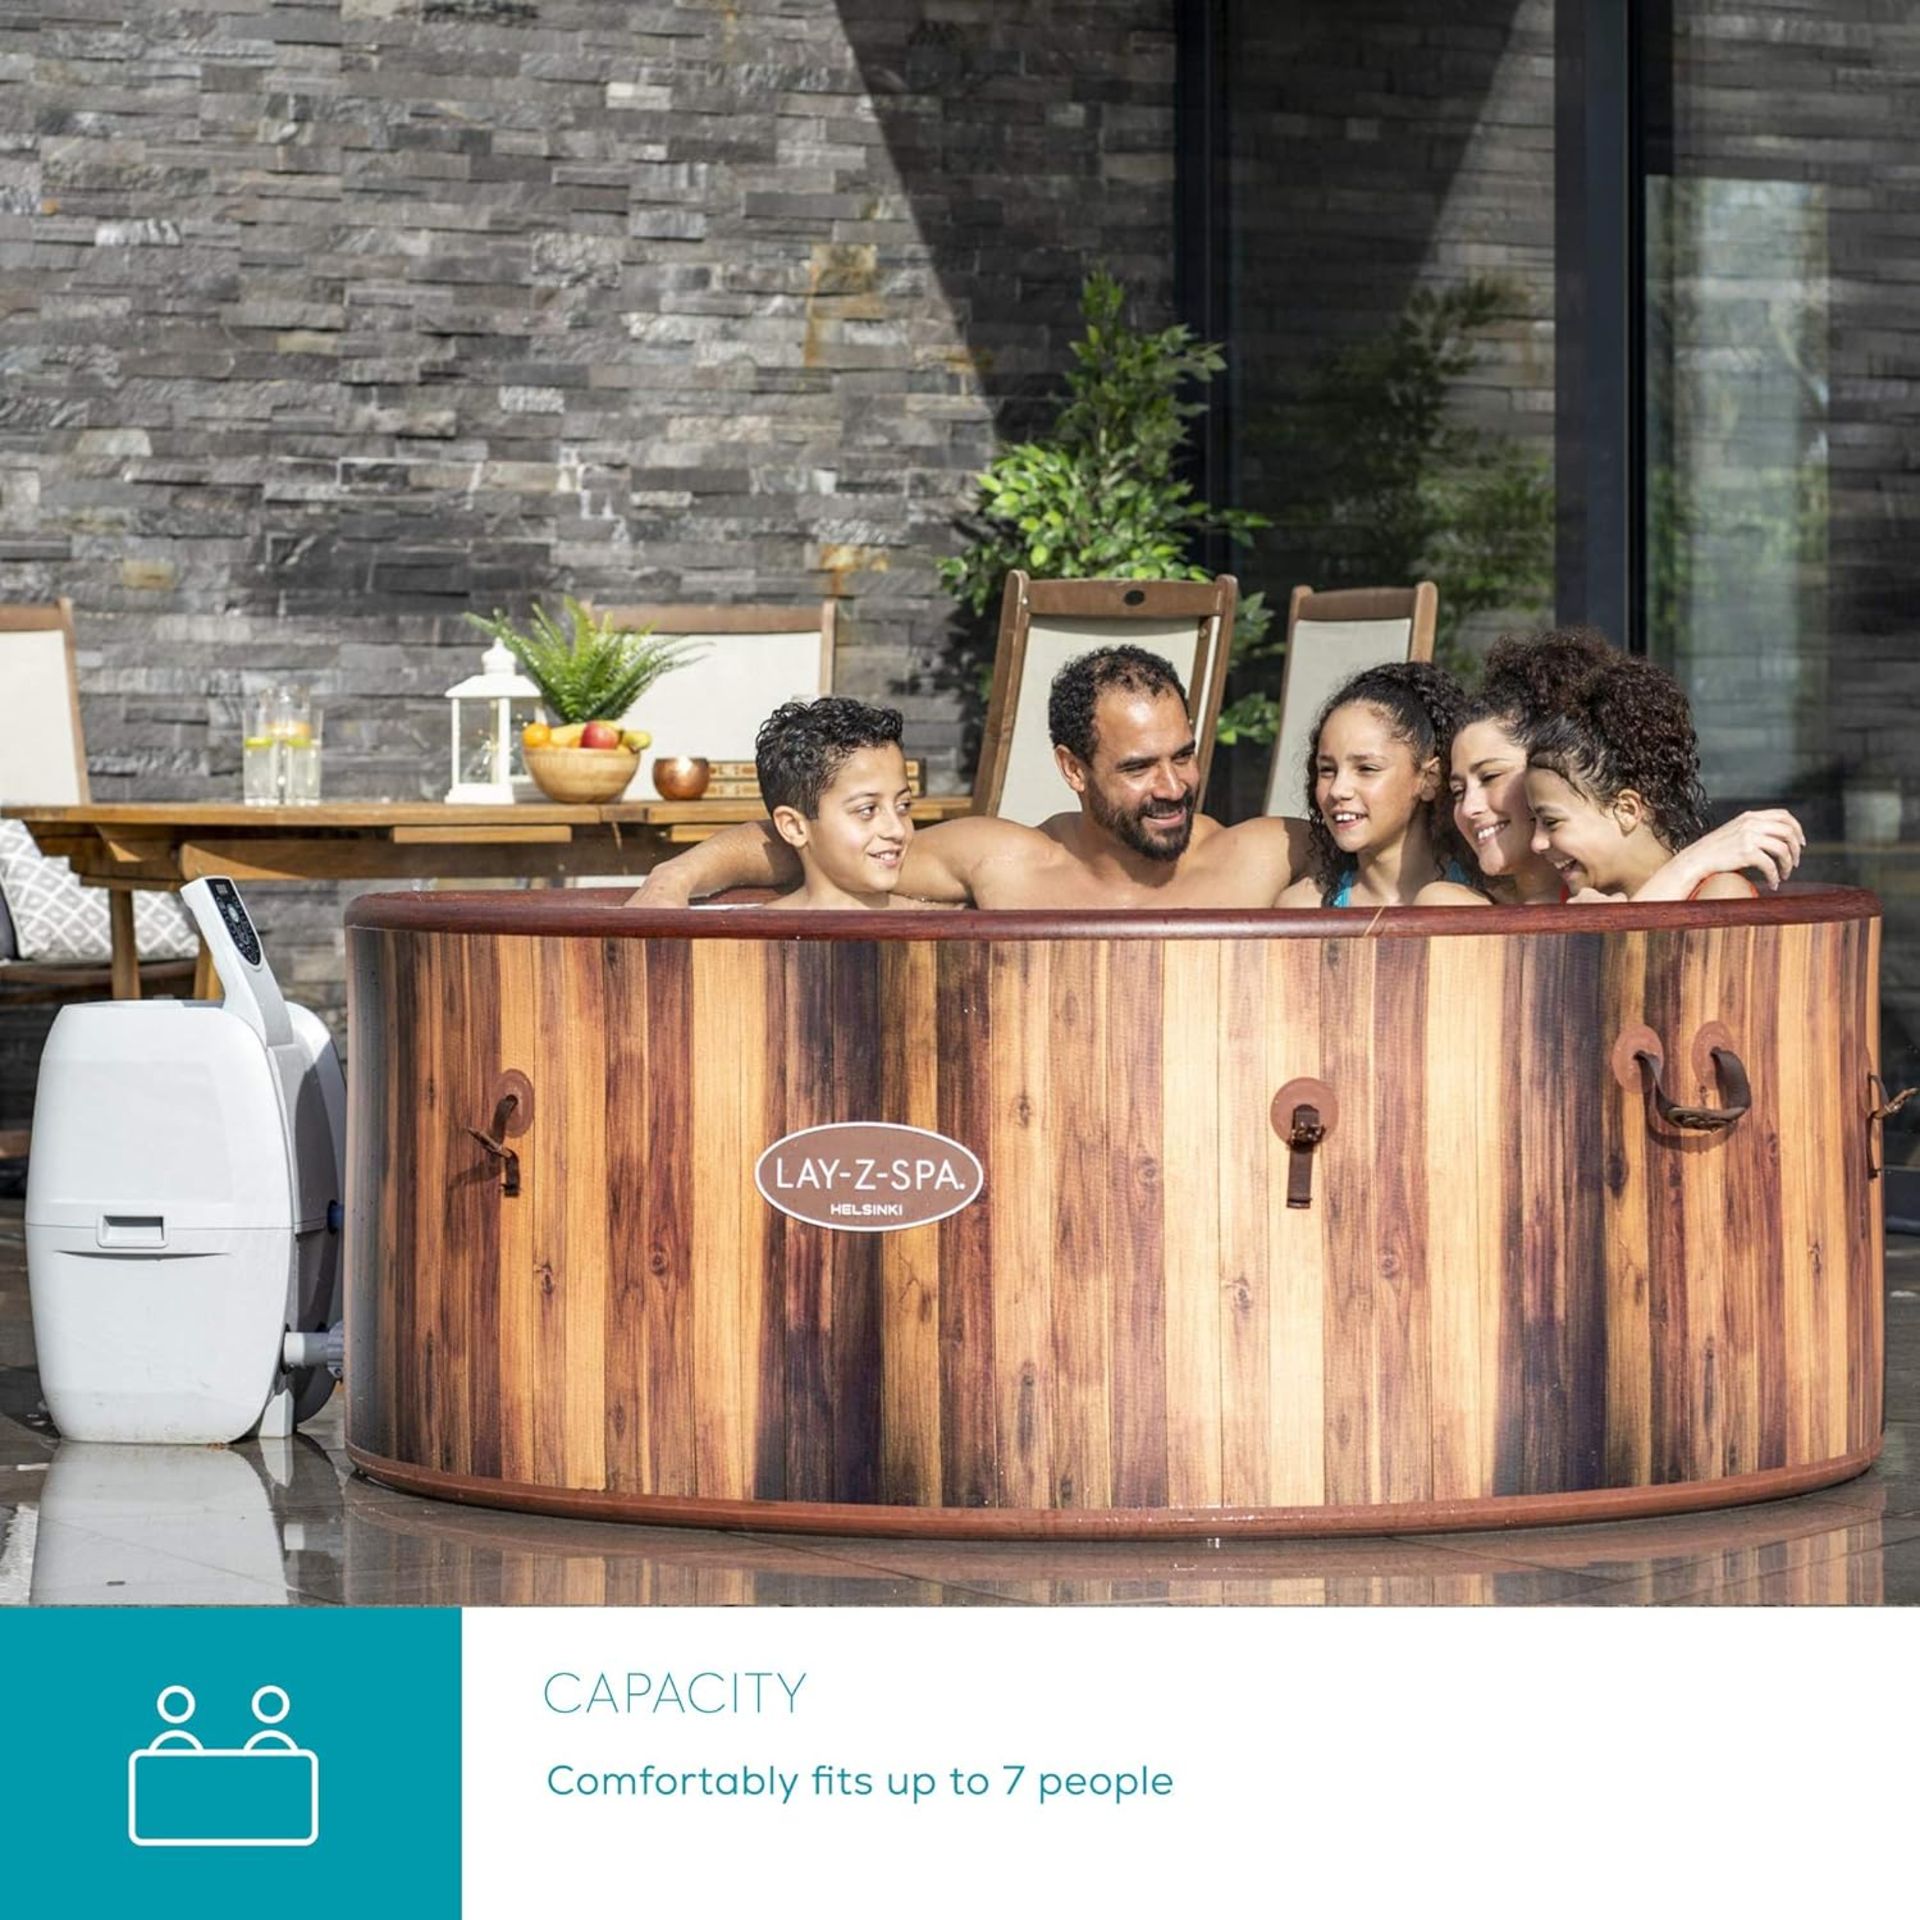 NEW & BOXED LAY-Z-SPA Helsinki 7 Person Hot Tub. RRP £919.99. This Nordic inspired spa features - Image 2 of 9